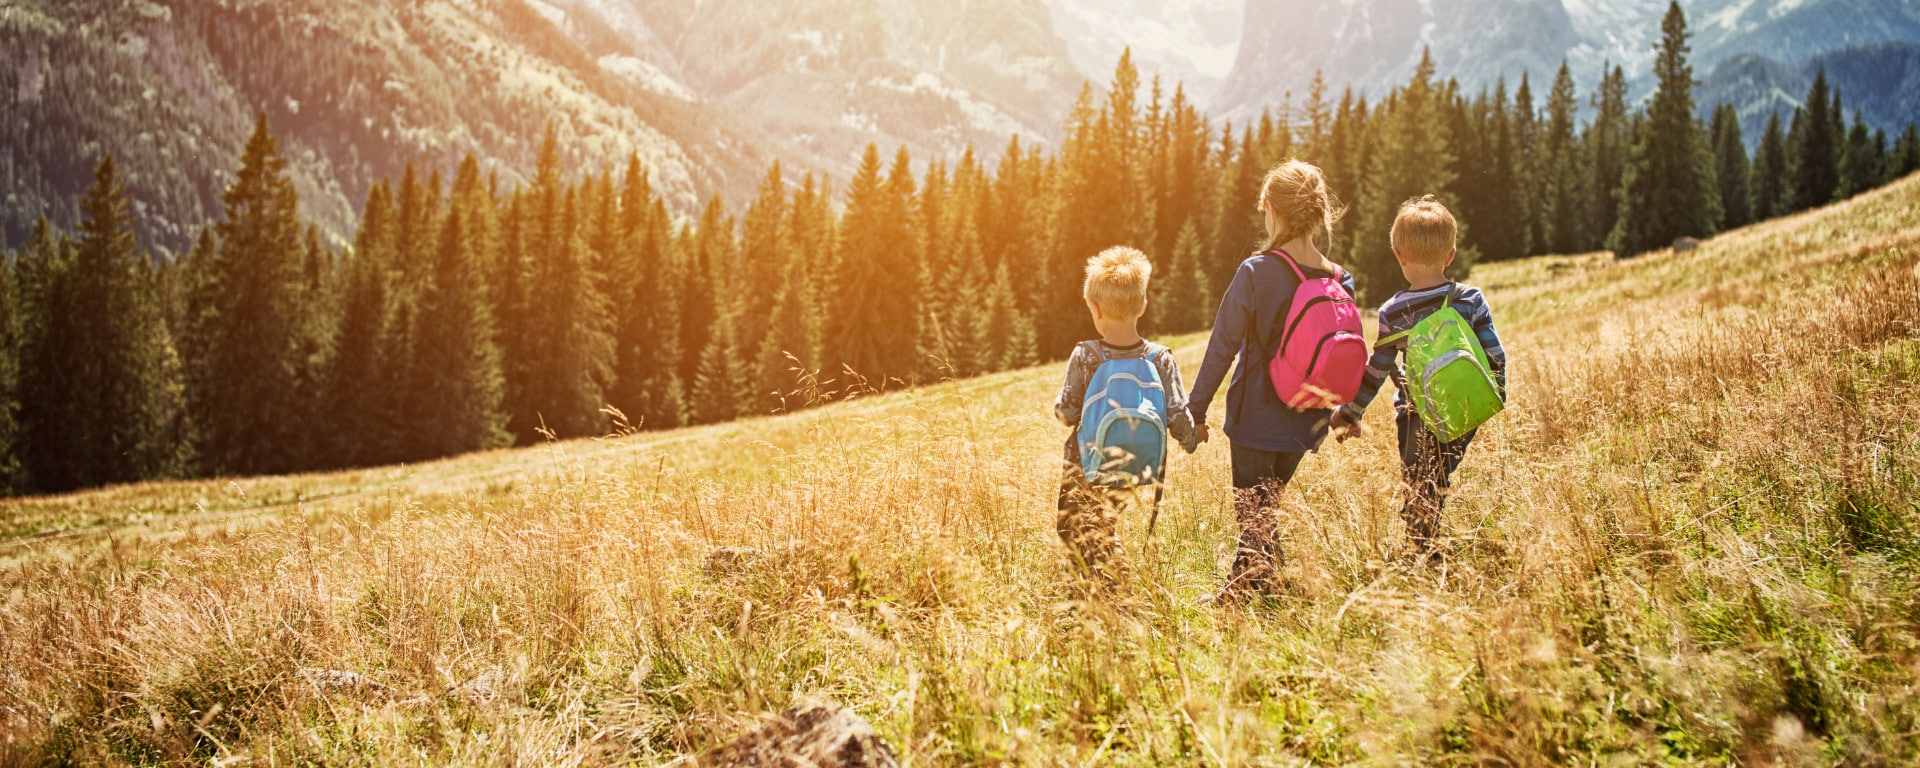 Kids Best Hiking Backpack - Feature Image